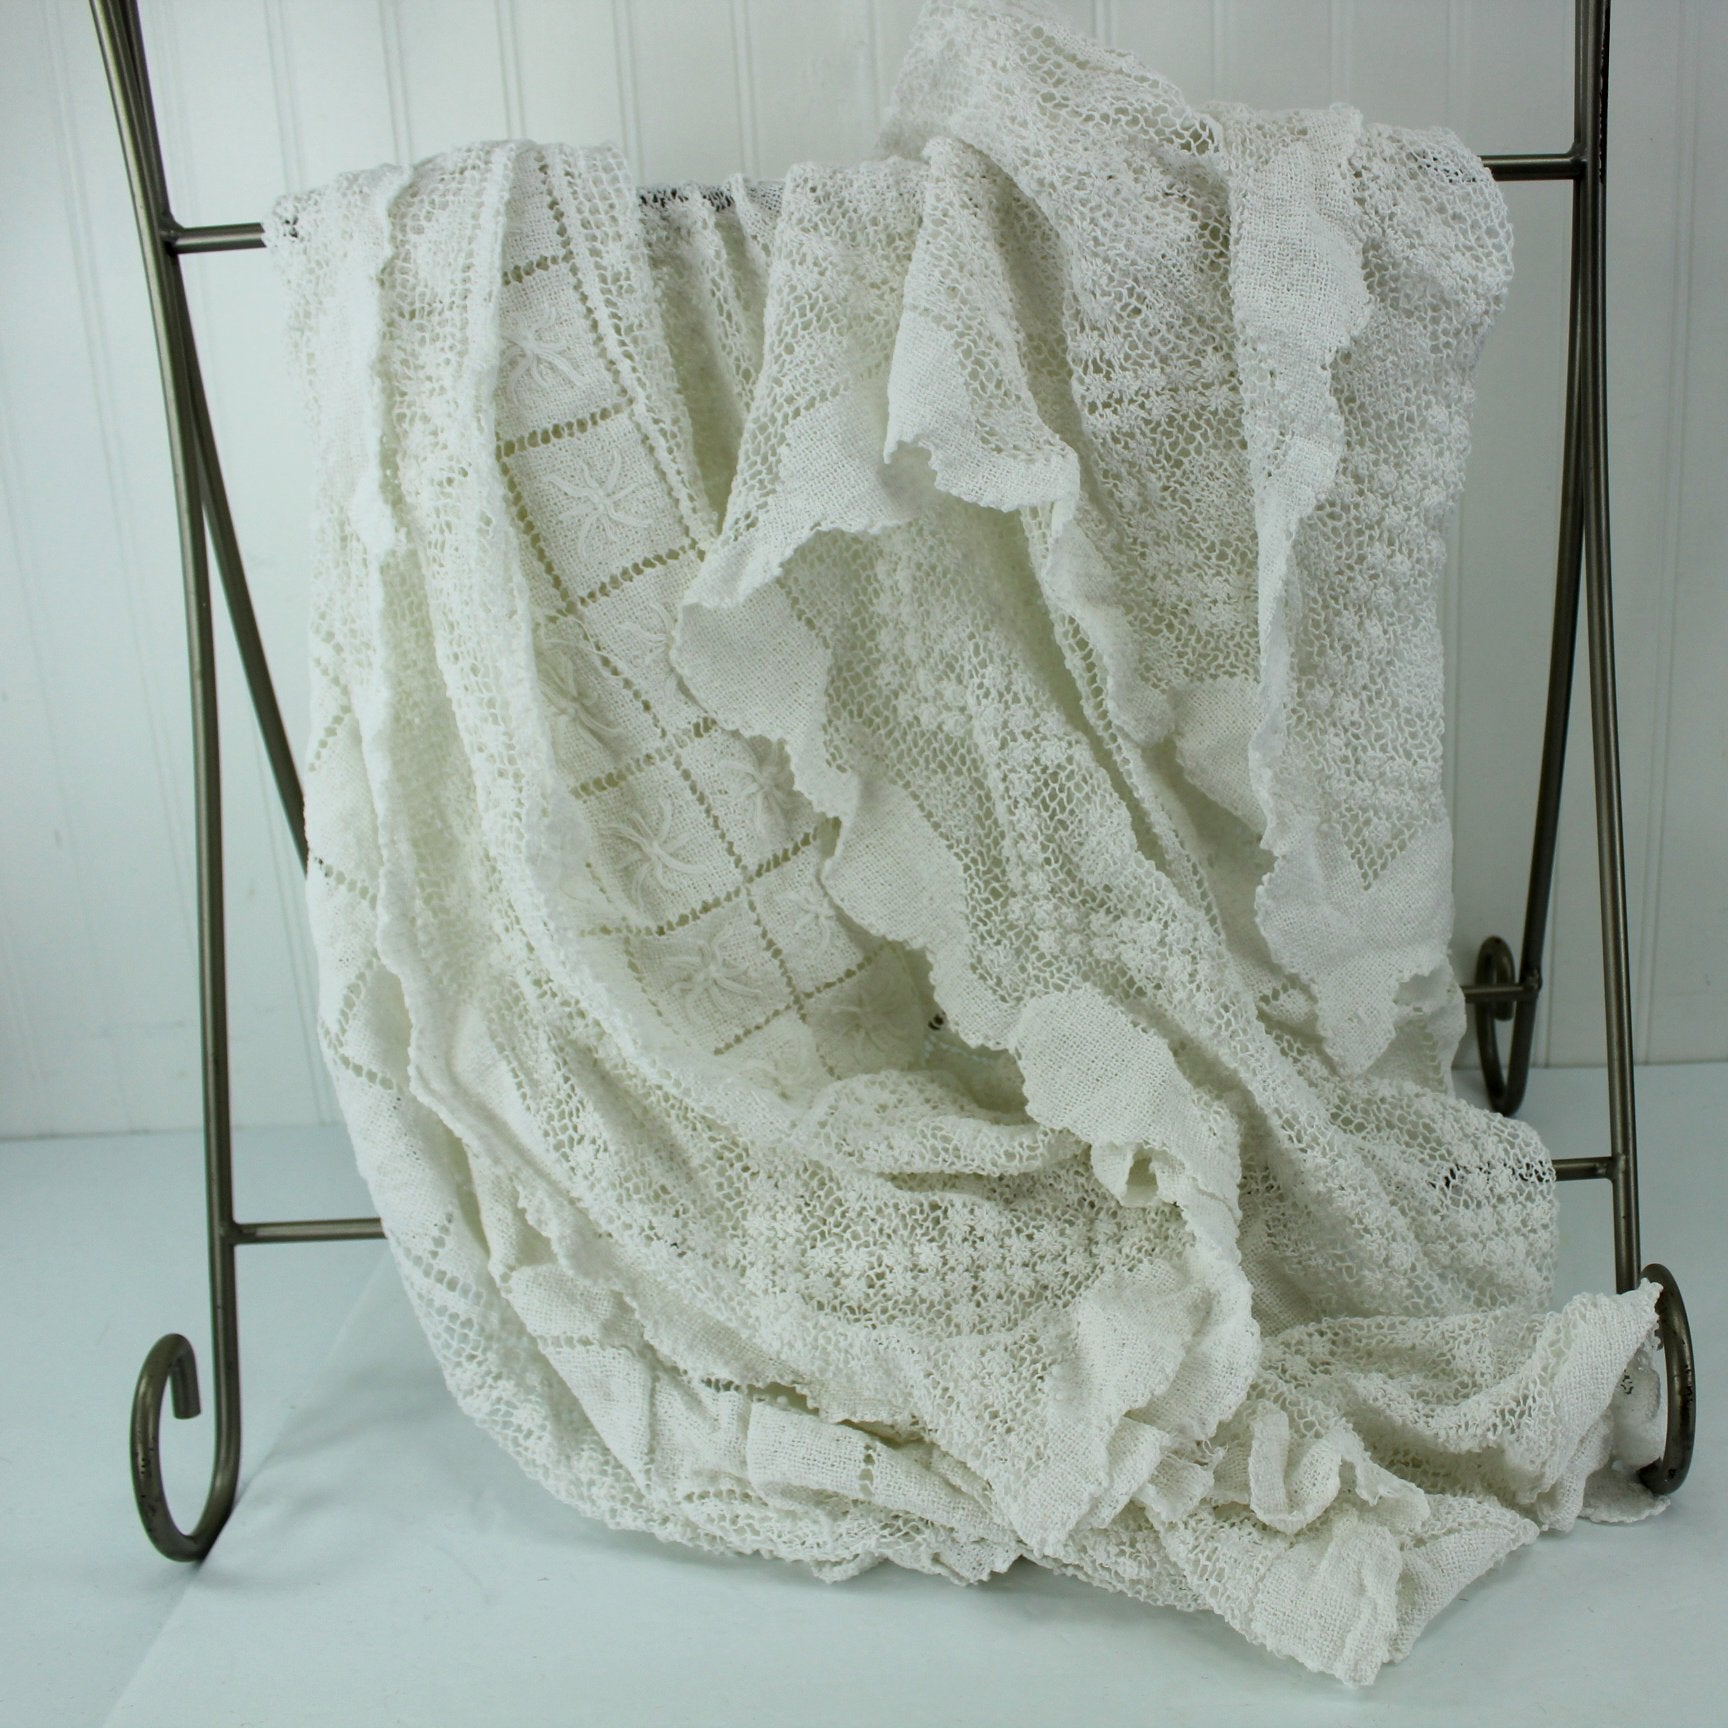 Older 1940s 50s Lace White Table Cloth Elegant Hevy Vraiety Weave 75" X 90"